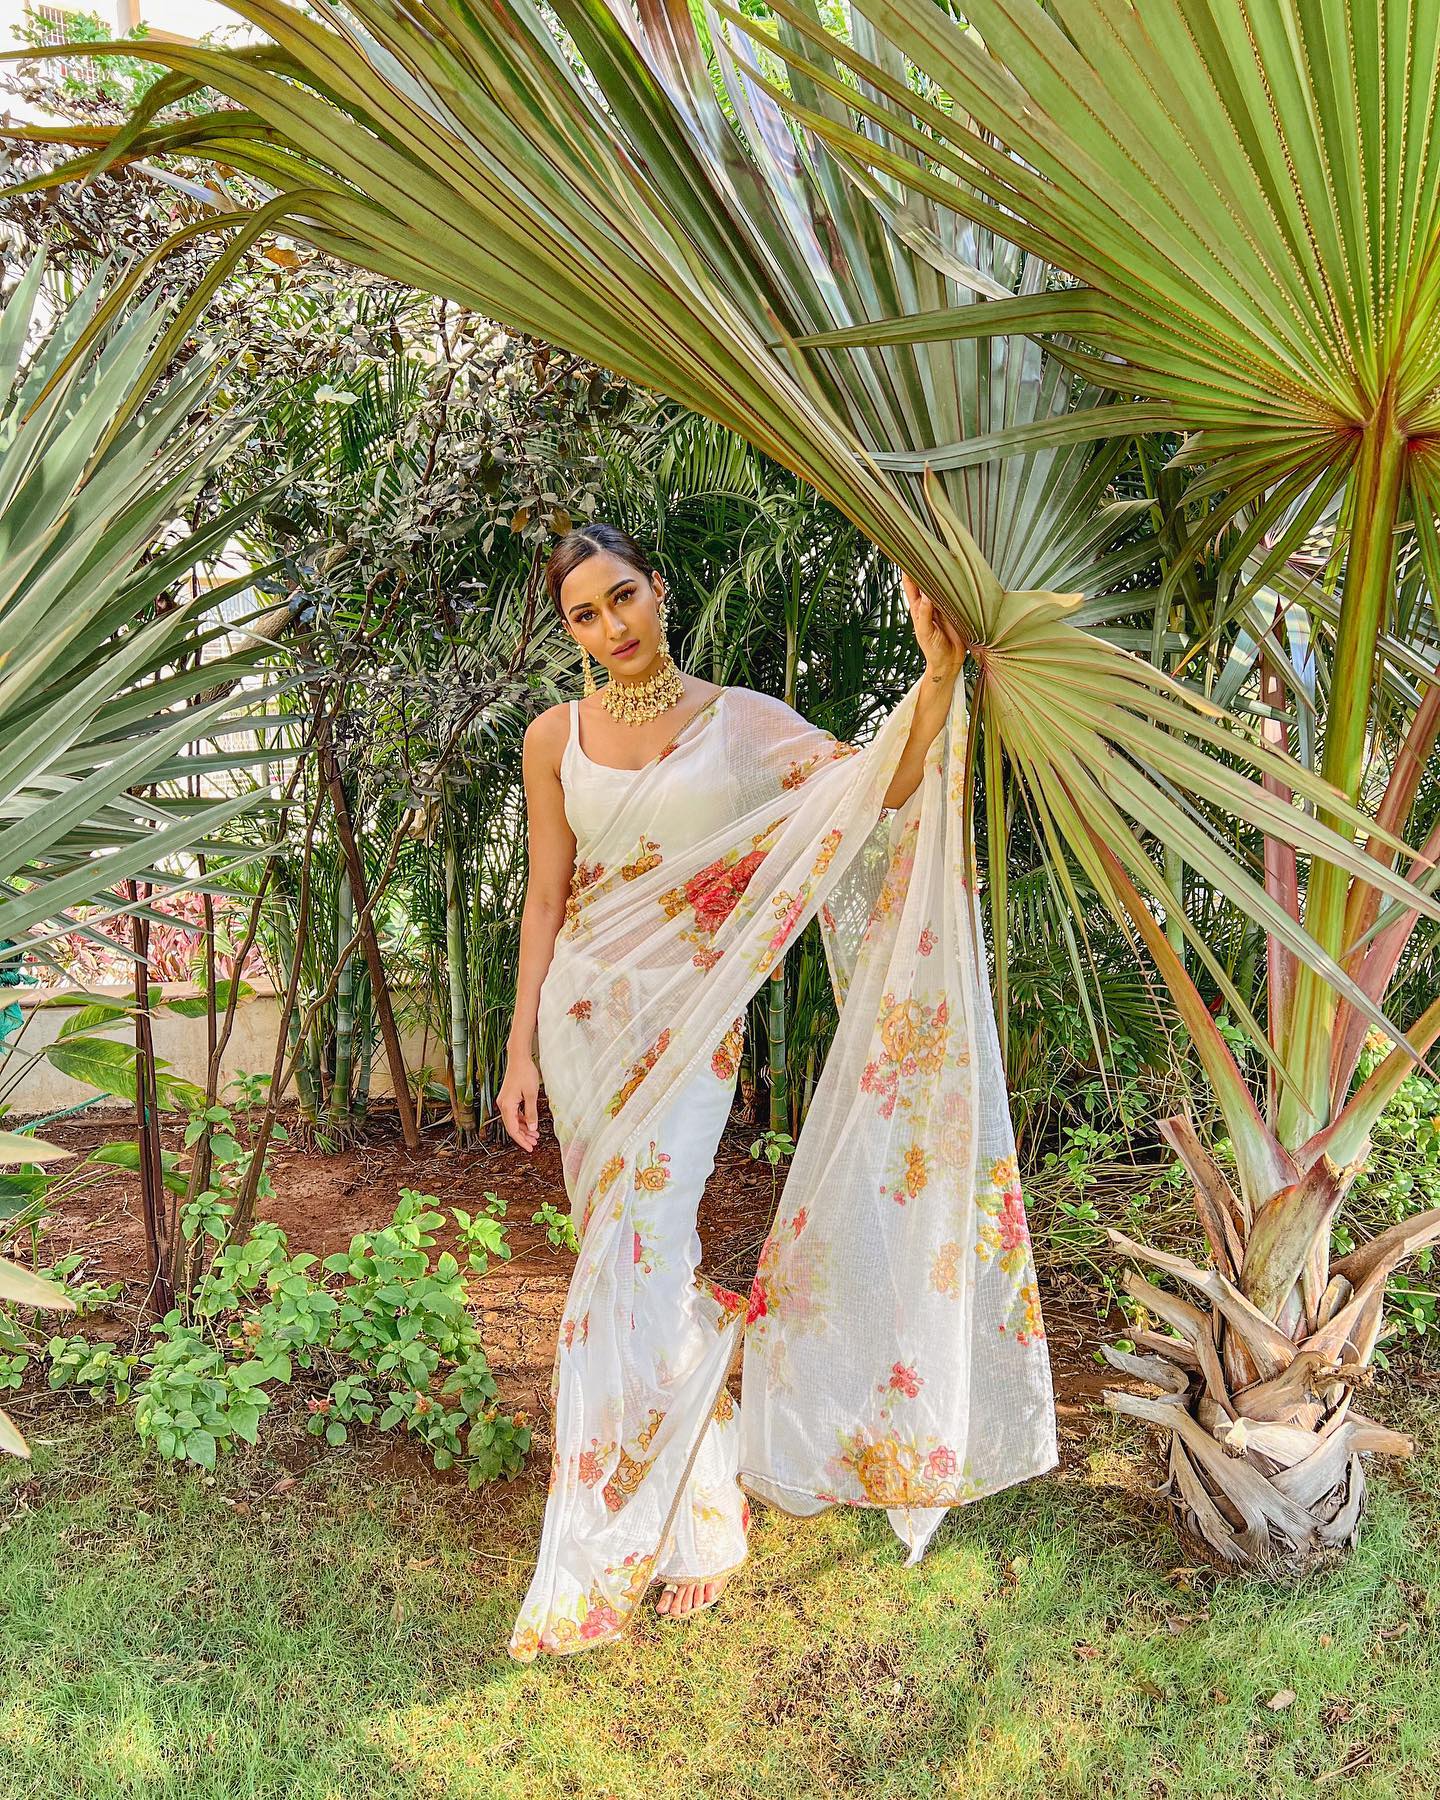 https://www.iwmbuzz.com/wp-content/uploads/2022/05/dazzling-beauty-erica-fernandes-burns-hearts-in-white-transparent-saree-parth-samthaan-talks-about-deep-feelings.jpg